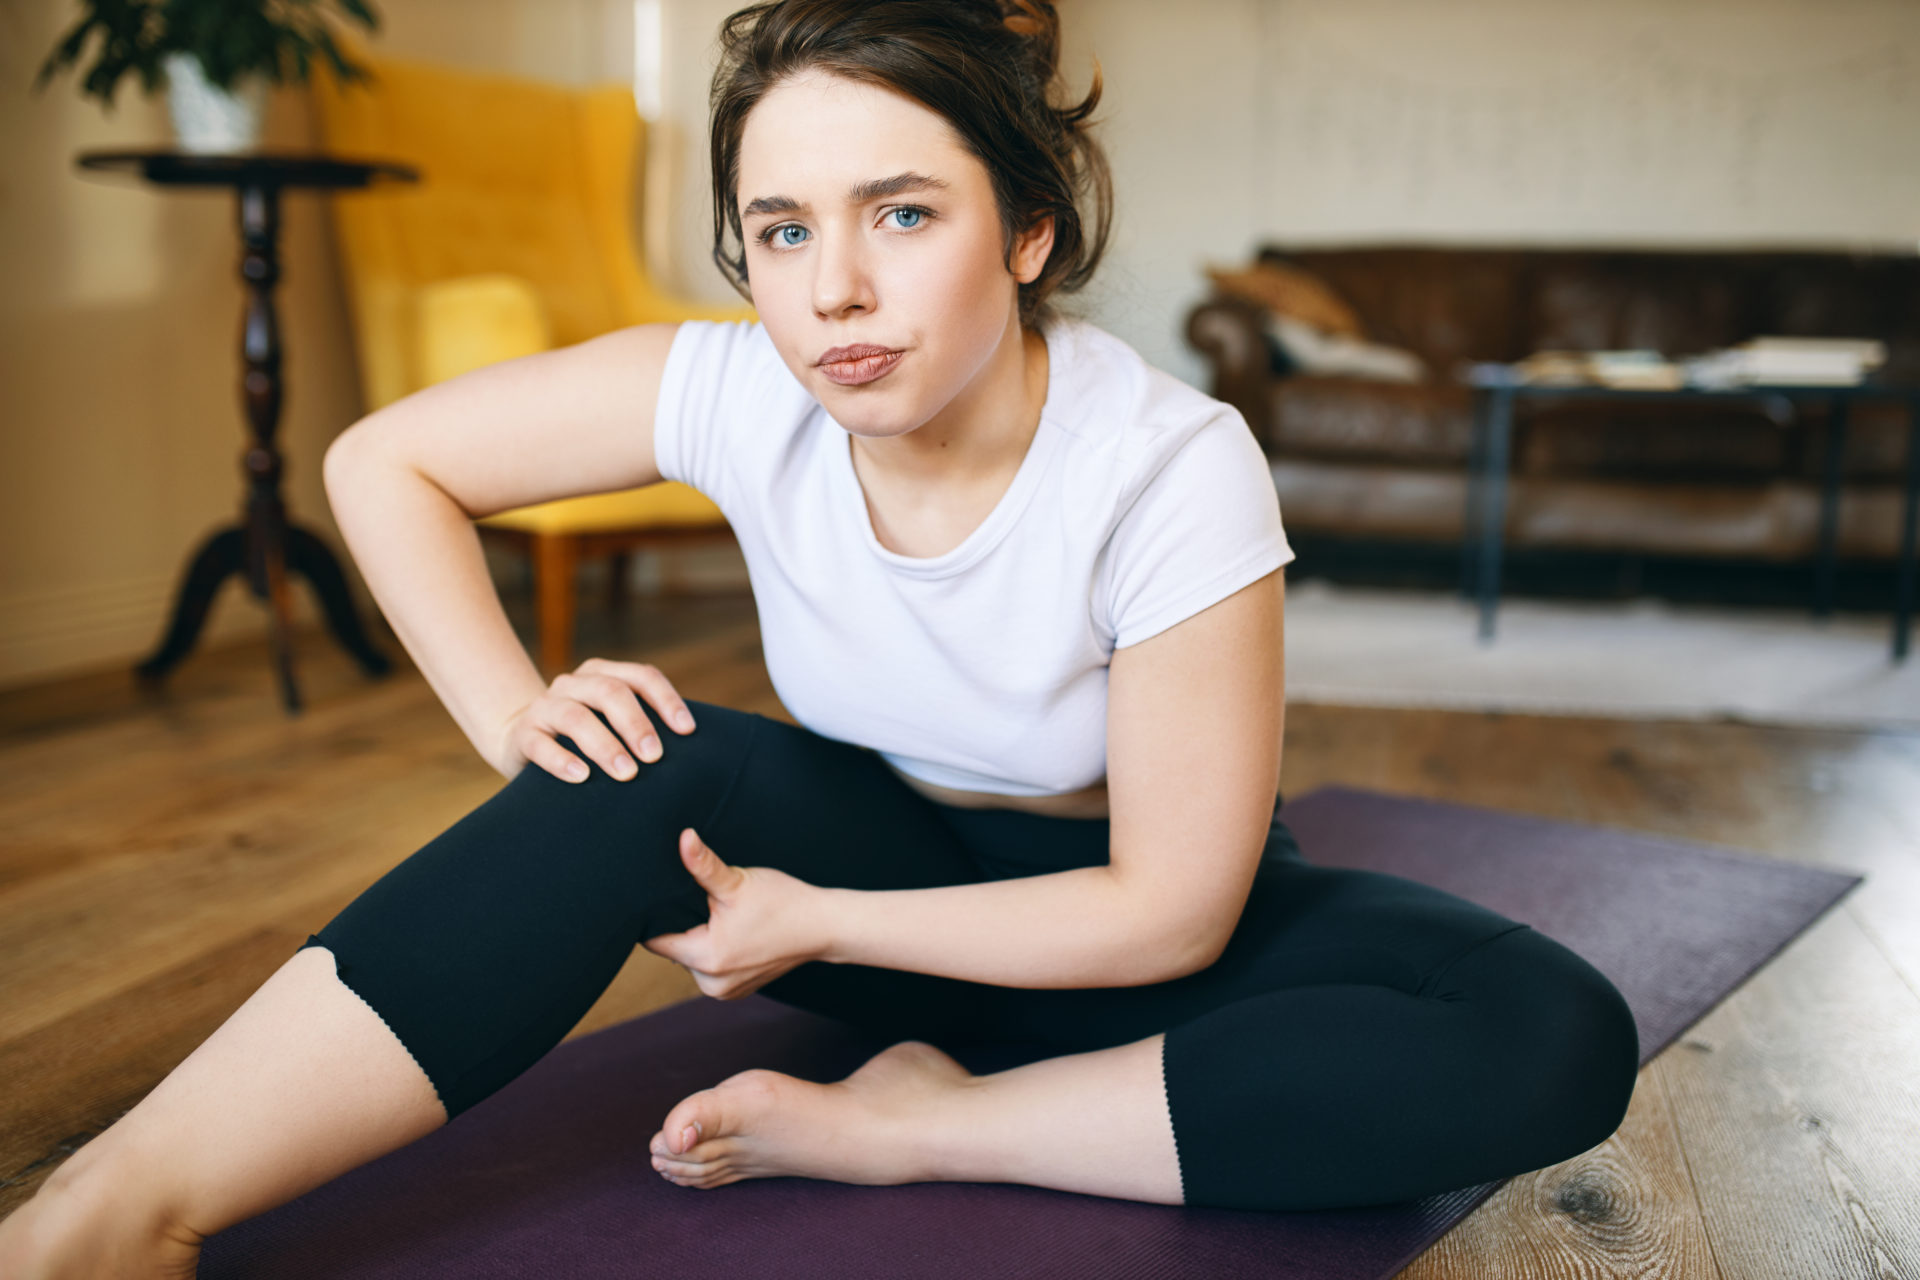 Upset frustrated young woman in sportswear feeling discomfort, tension and pain in her knee during yoga class because doing exercises incorrectly. Sports injury, trauma and fitness concept